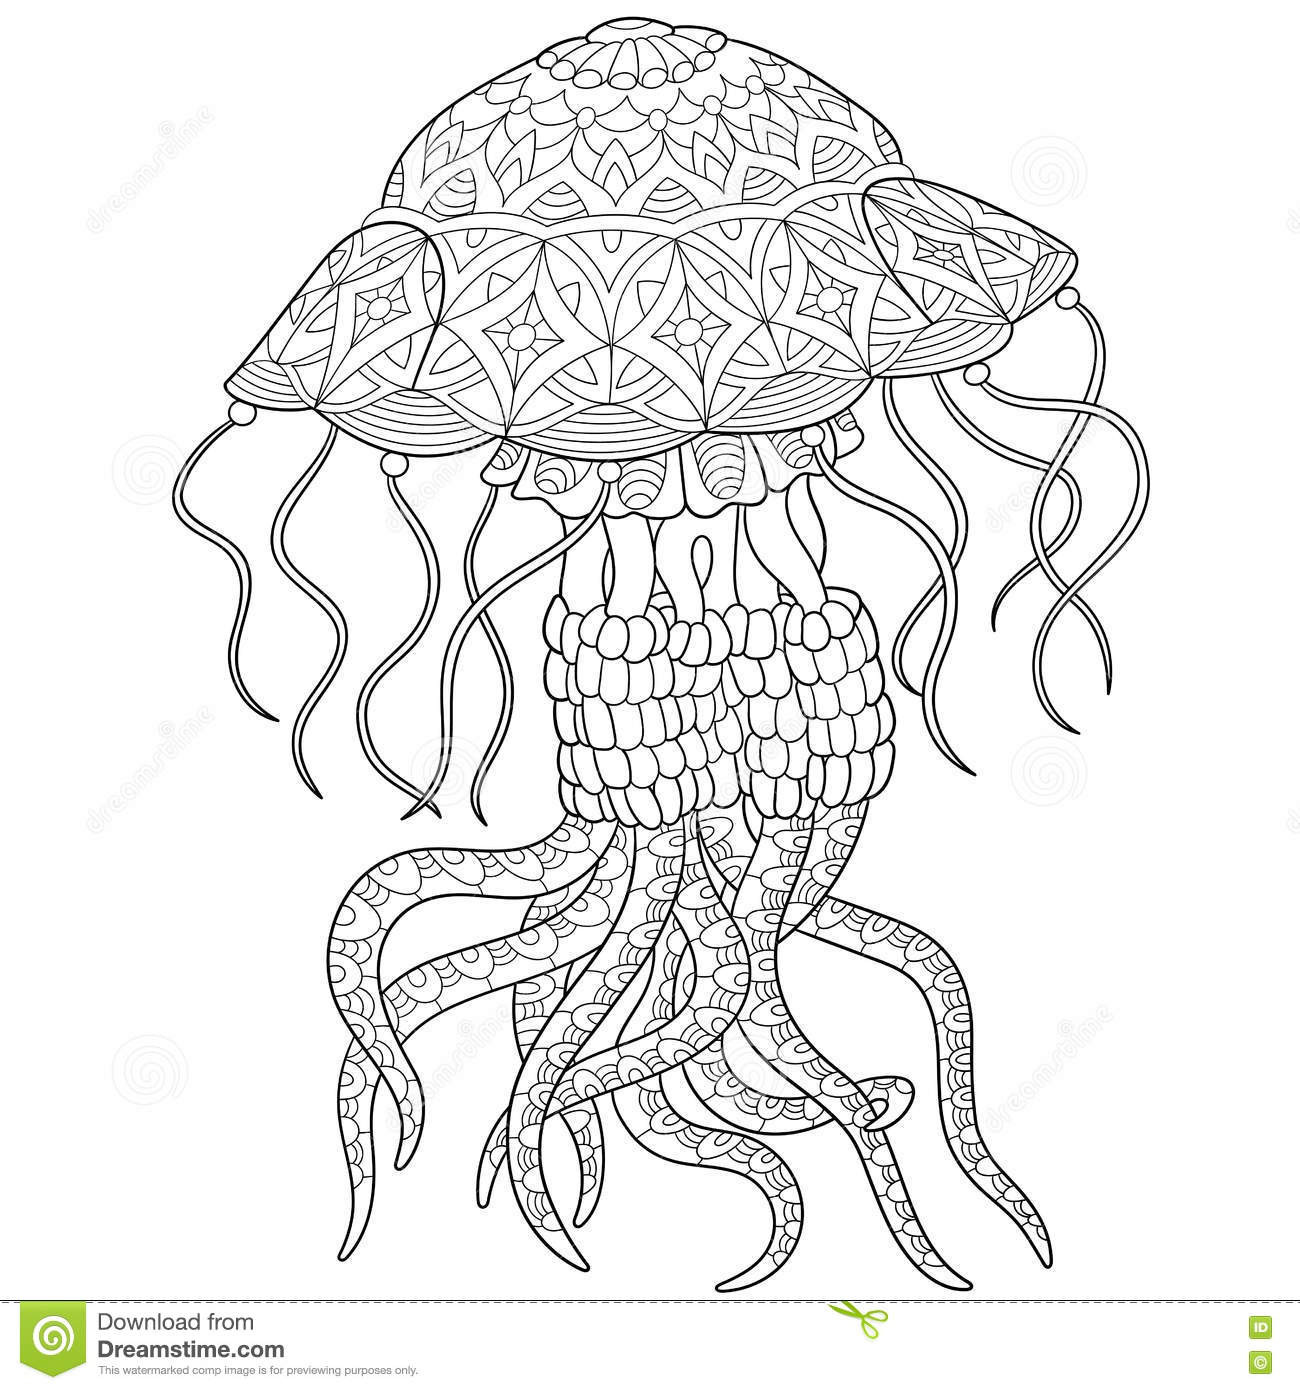 Jellyfish Coloring Pages For Adults
 Zentangle Stylized Jellyfish Stock Vector Illustration